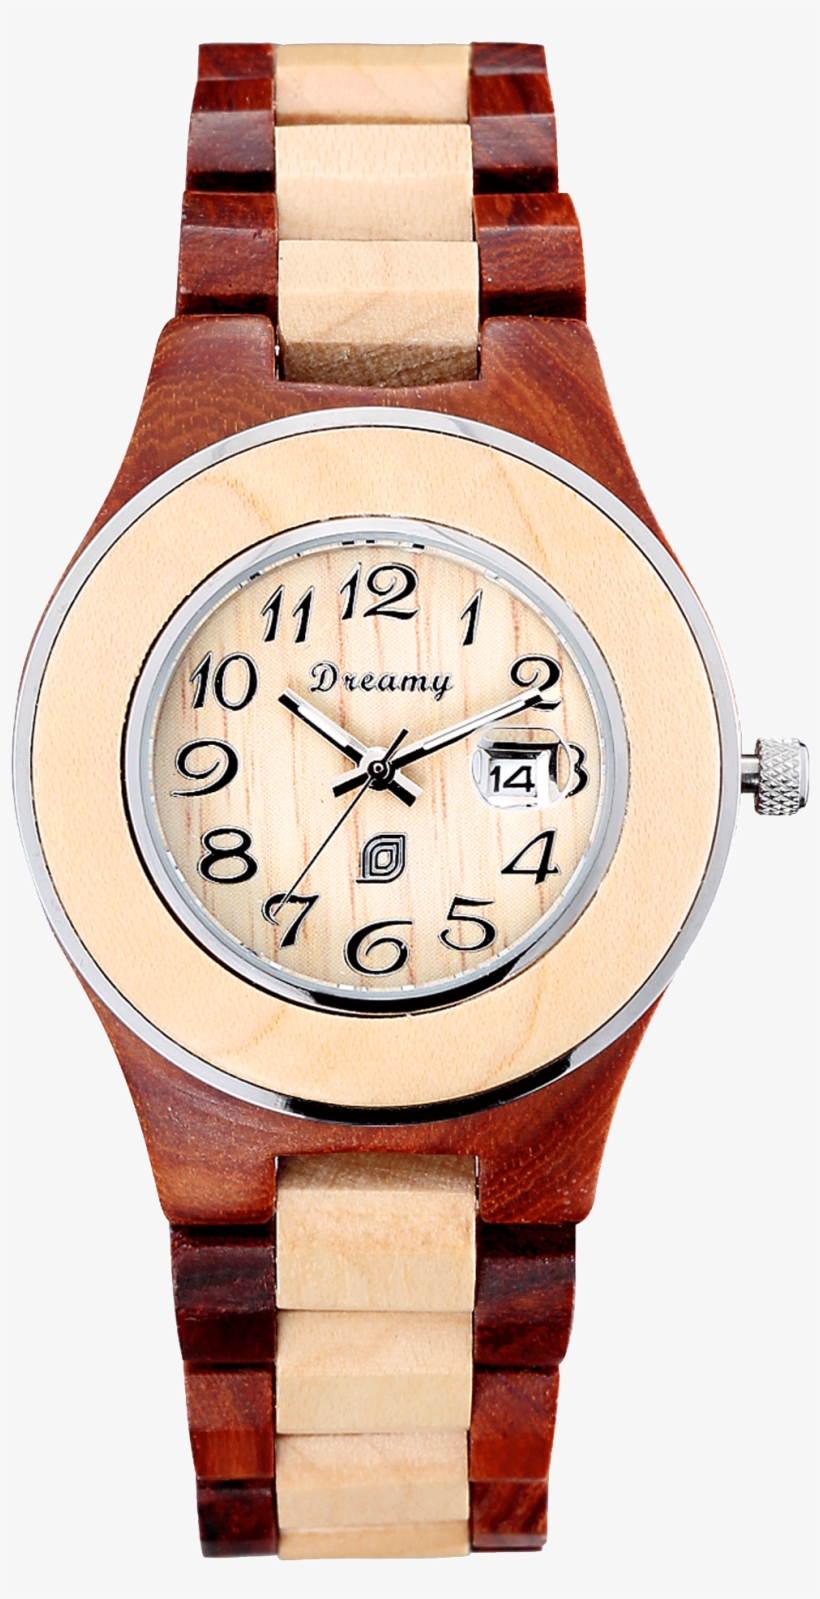 Women's Wooden Watch Maple & Rosewood $82usd Designed - Analog Watch, transparent png #7781394